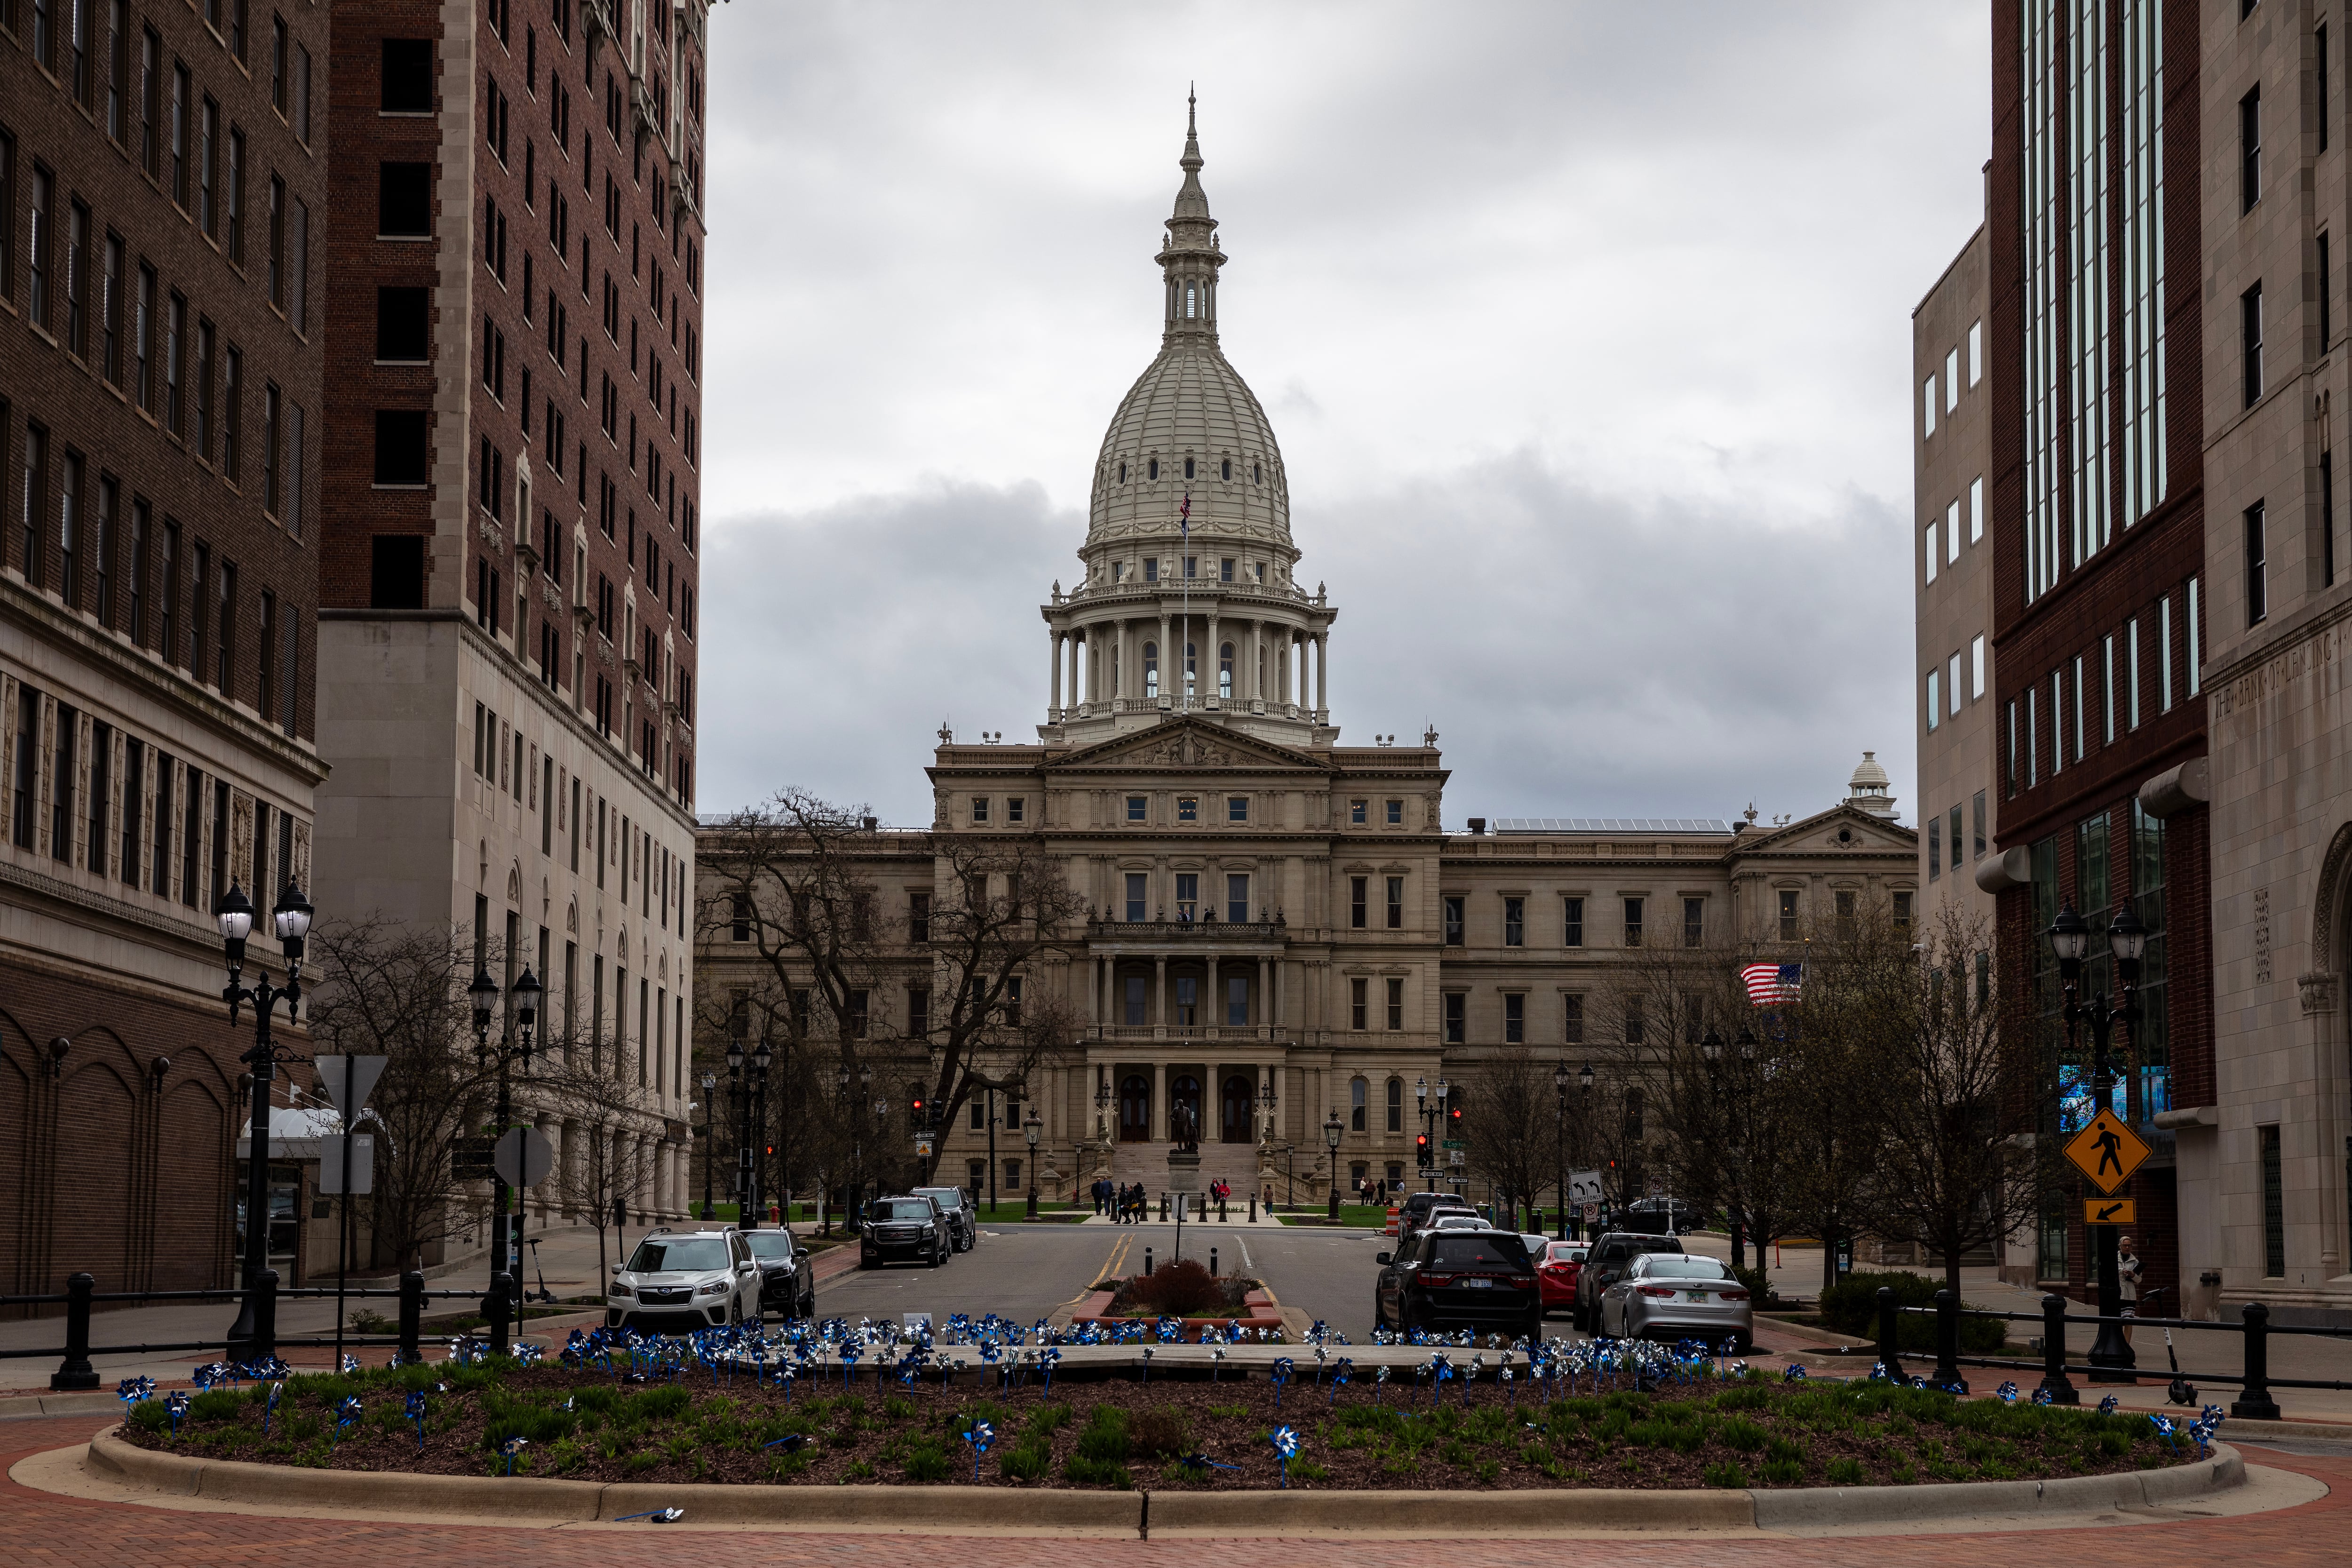 A wide view of the Michigan State Capitol building with a cloudy sky behind.